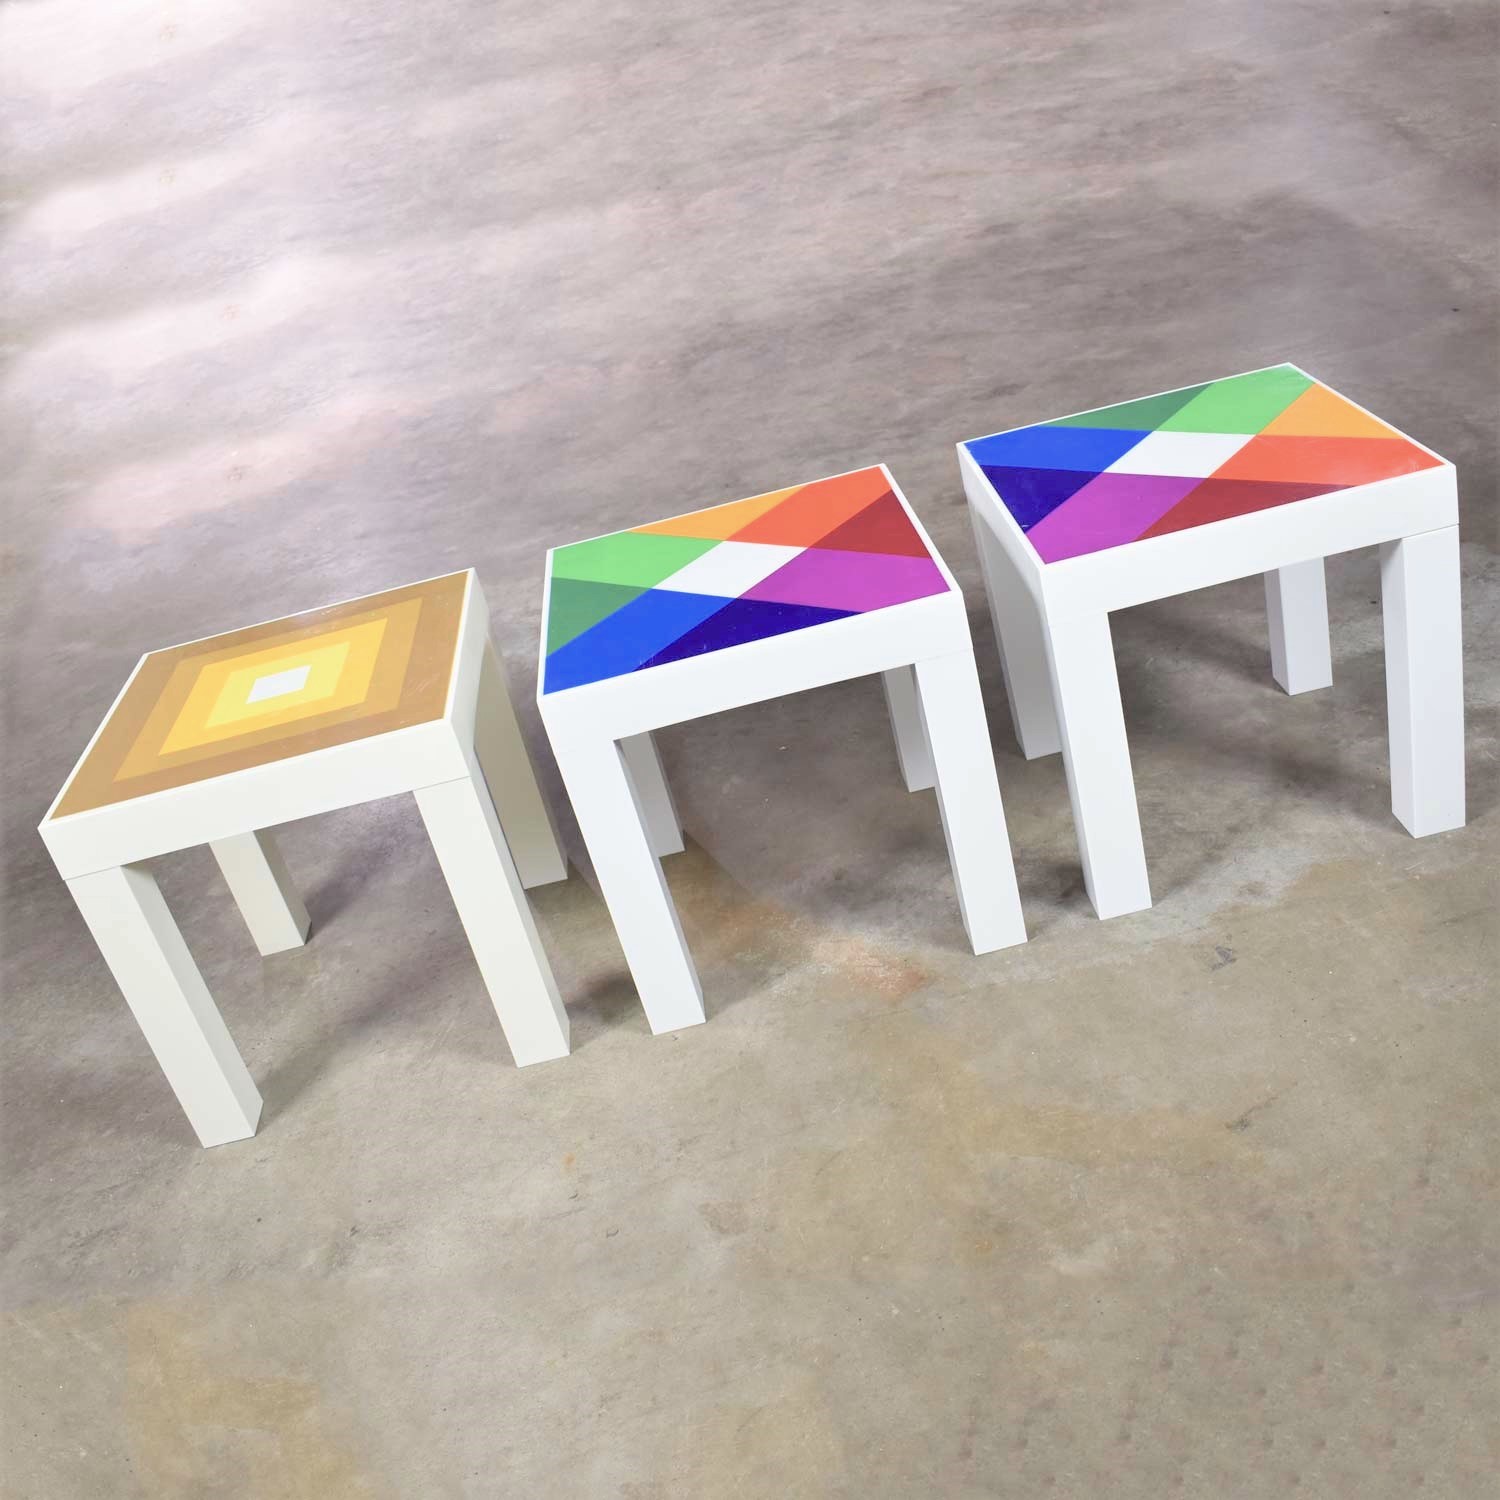 Trio of Mod Pop Art Plastic Parsons Style Square Side Tables Style Kartell or Syroco